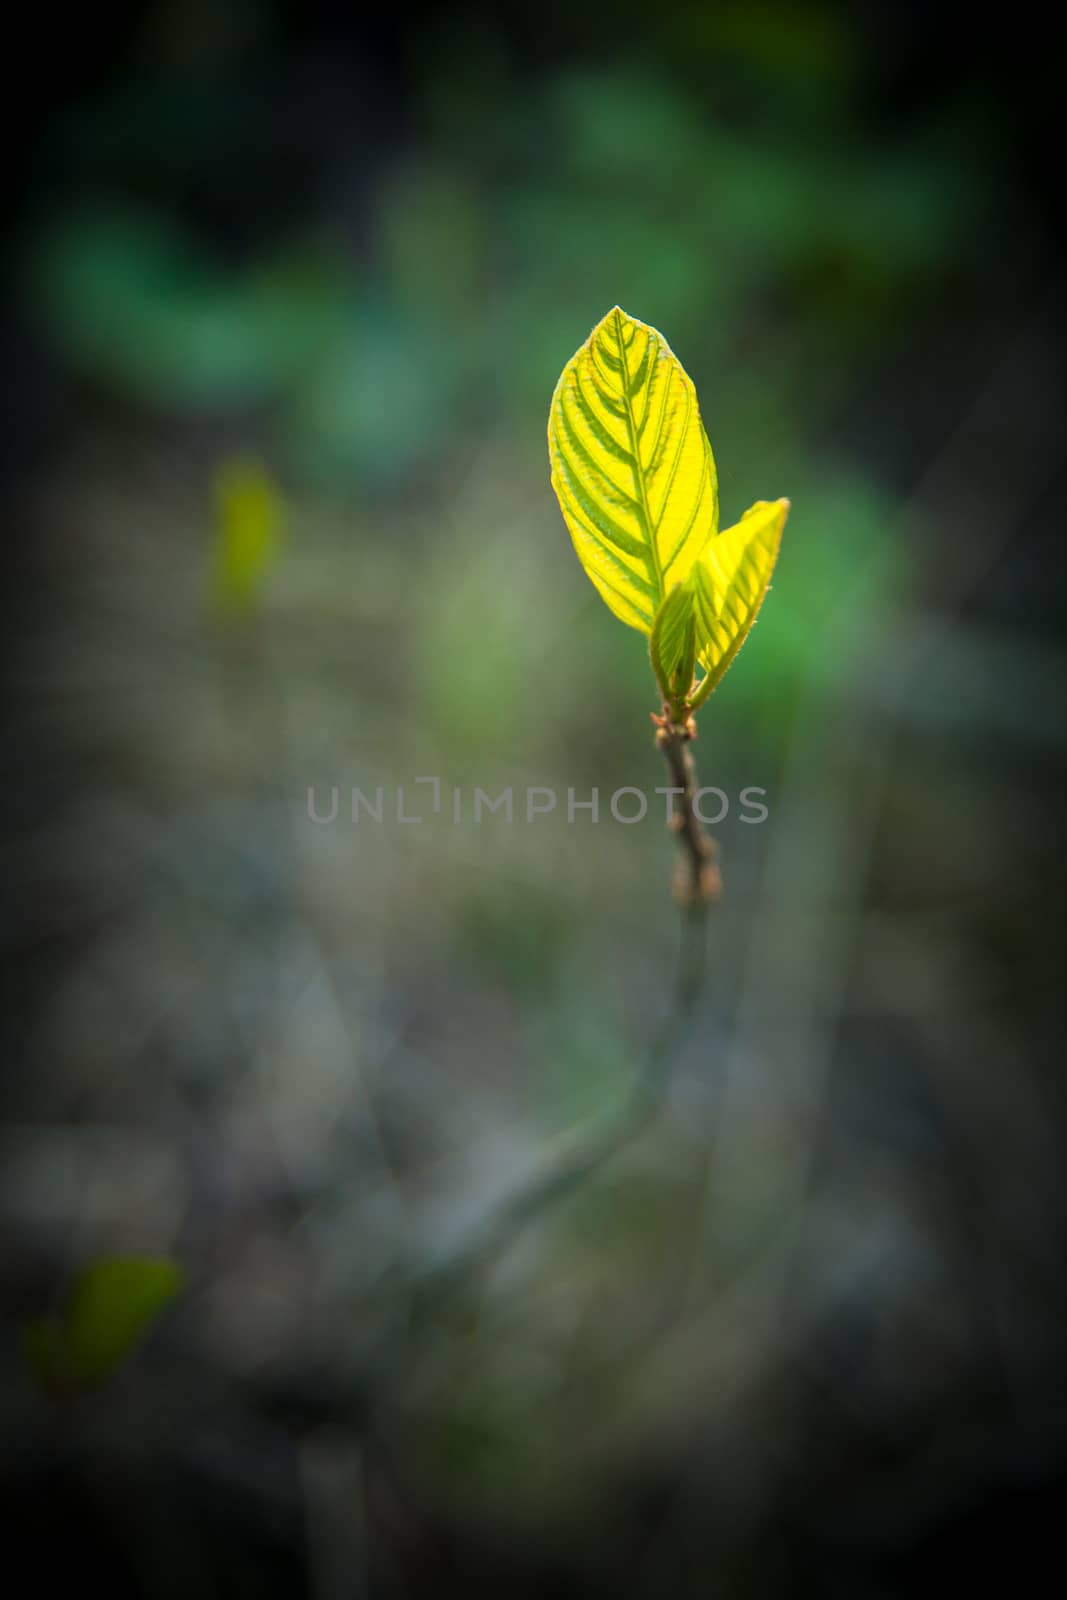 New leaf growing of ground by juhku